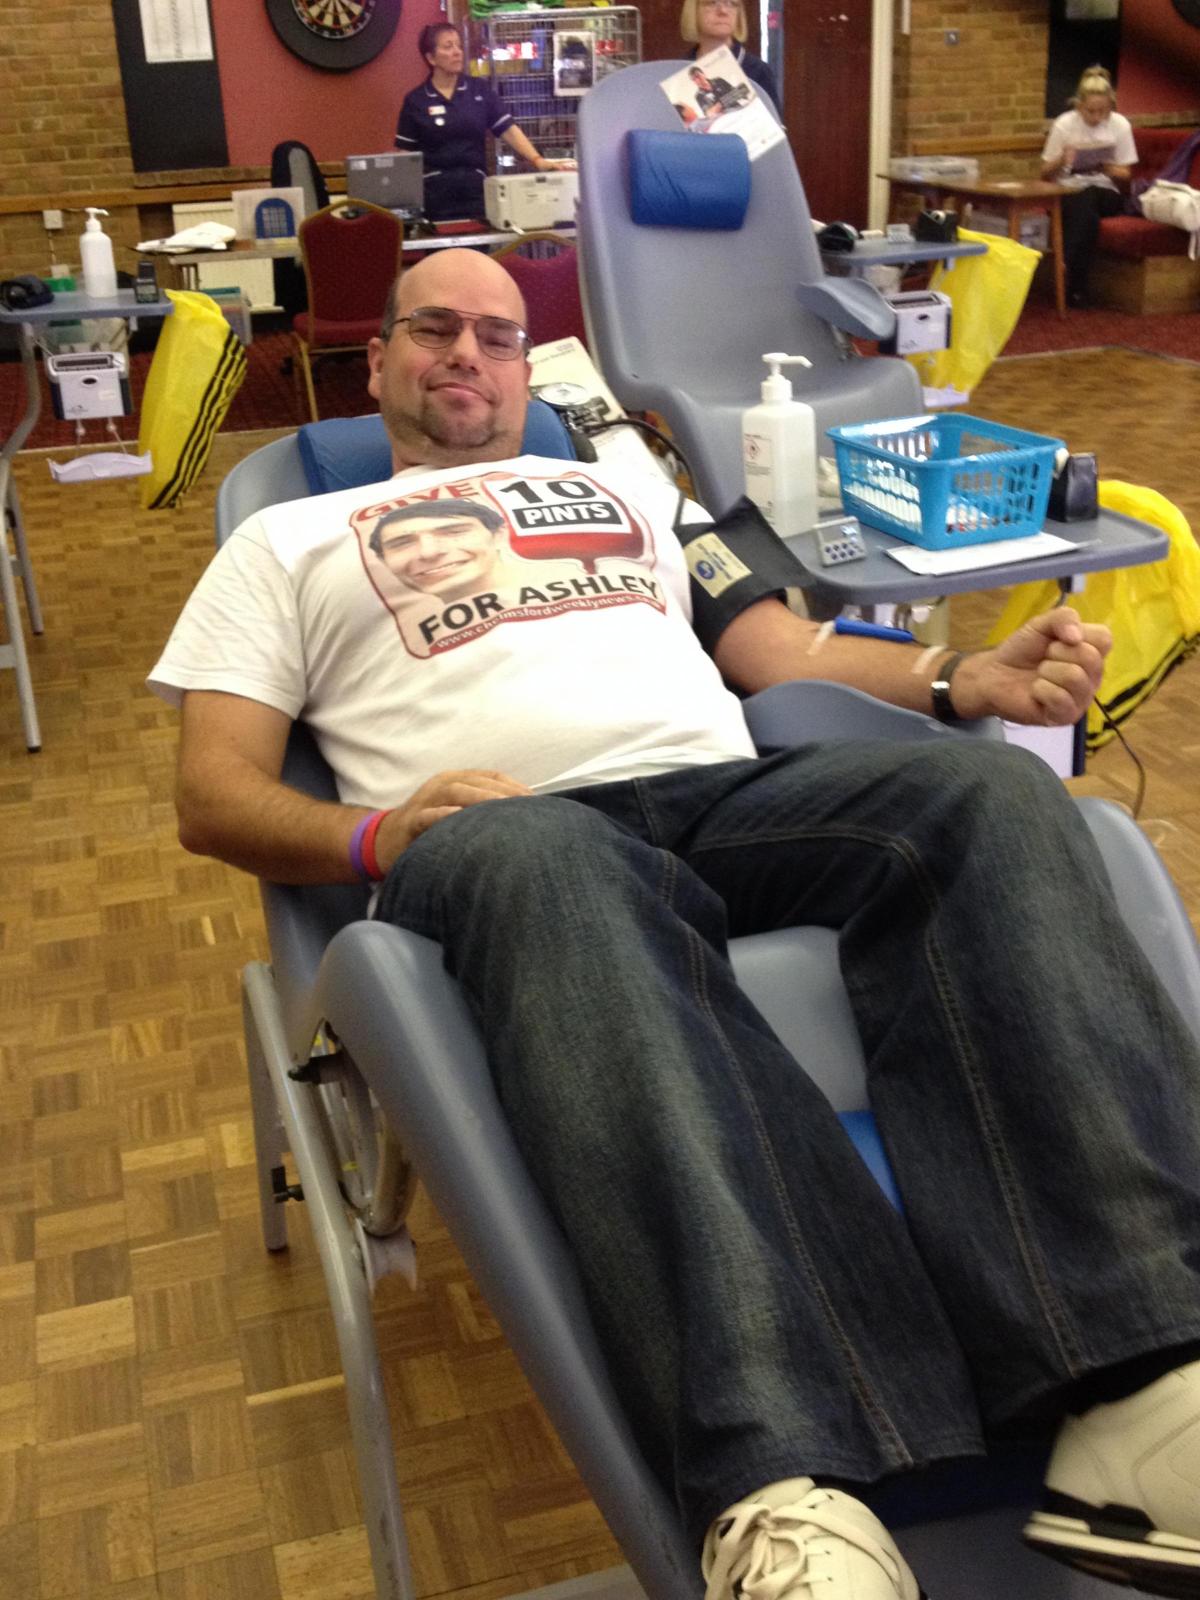 Trevor gives his donation - the first of 86 appointments.